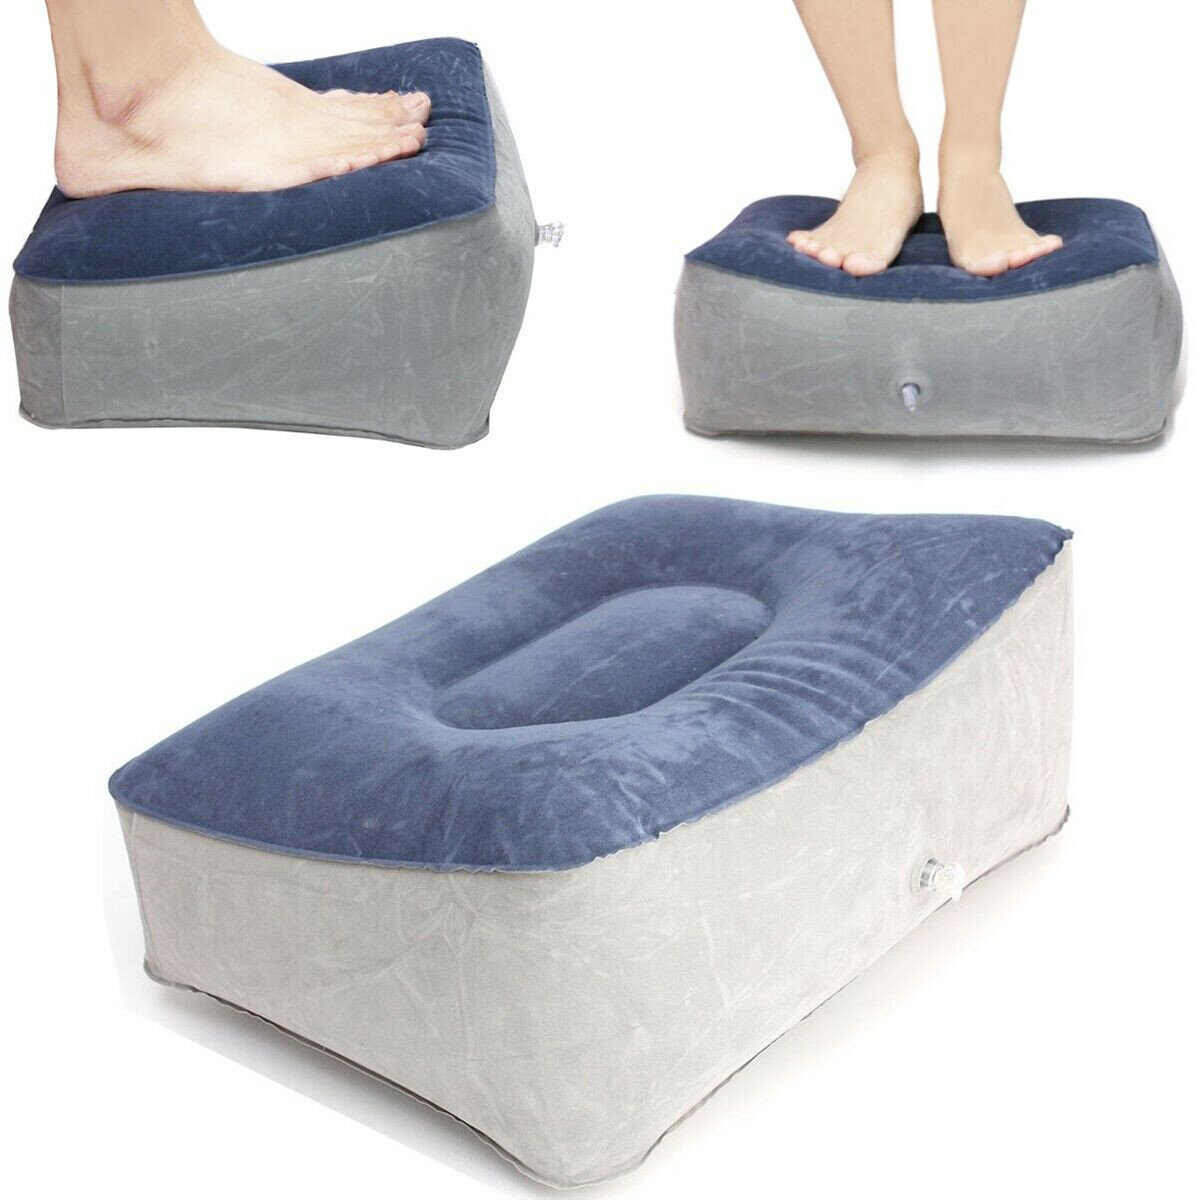 Inflatable Footrest Pillow Travel Home Help Reduce DVT Risk Trips Flight Relax Air Cushion